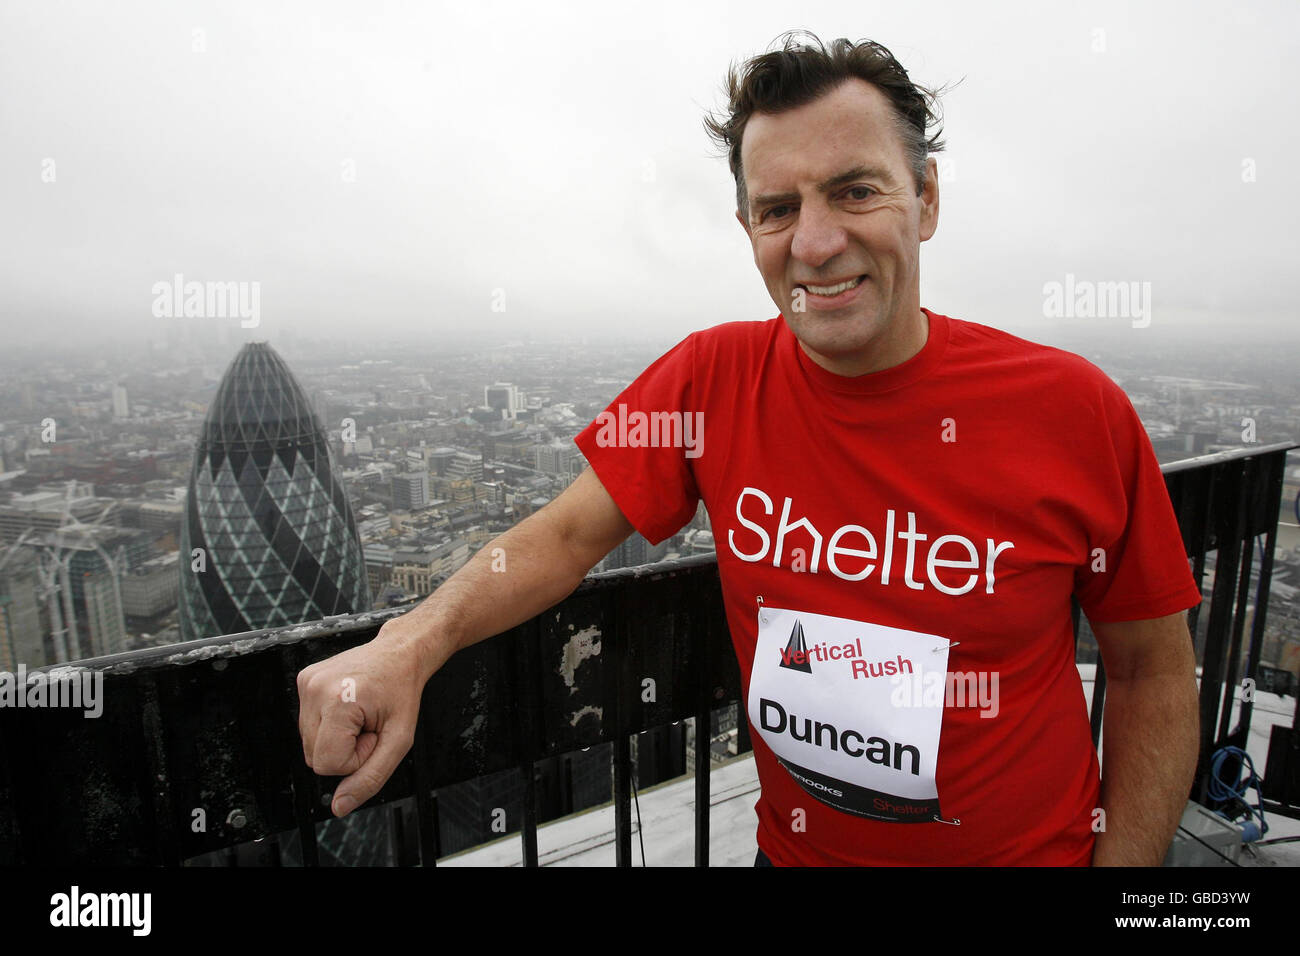 Duncan Bannatyne at the very top of Tower 42 in the City of London, as he launches Vertical Rush, an endurance event that challenges people to run up the stairs of the tower in the fastest time possible to raise money for the housing charity Shelter. Stock Photo